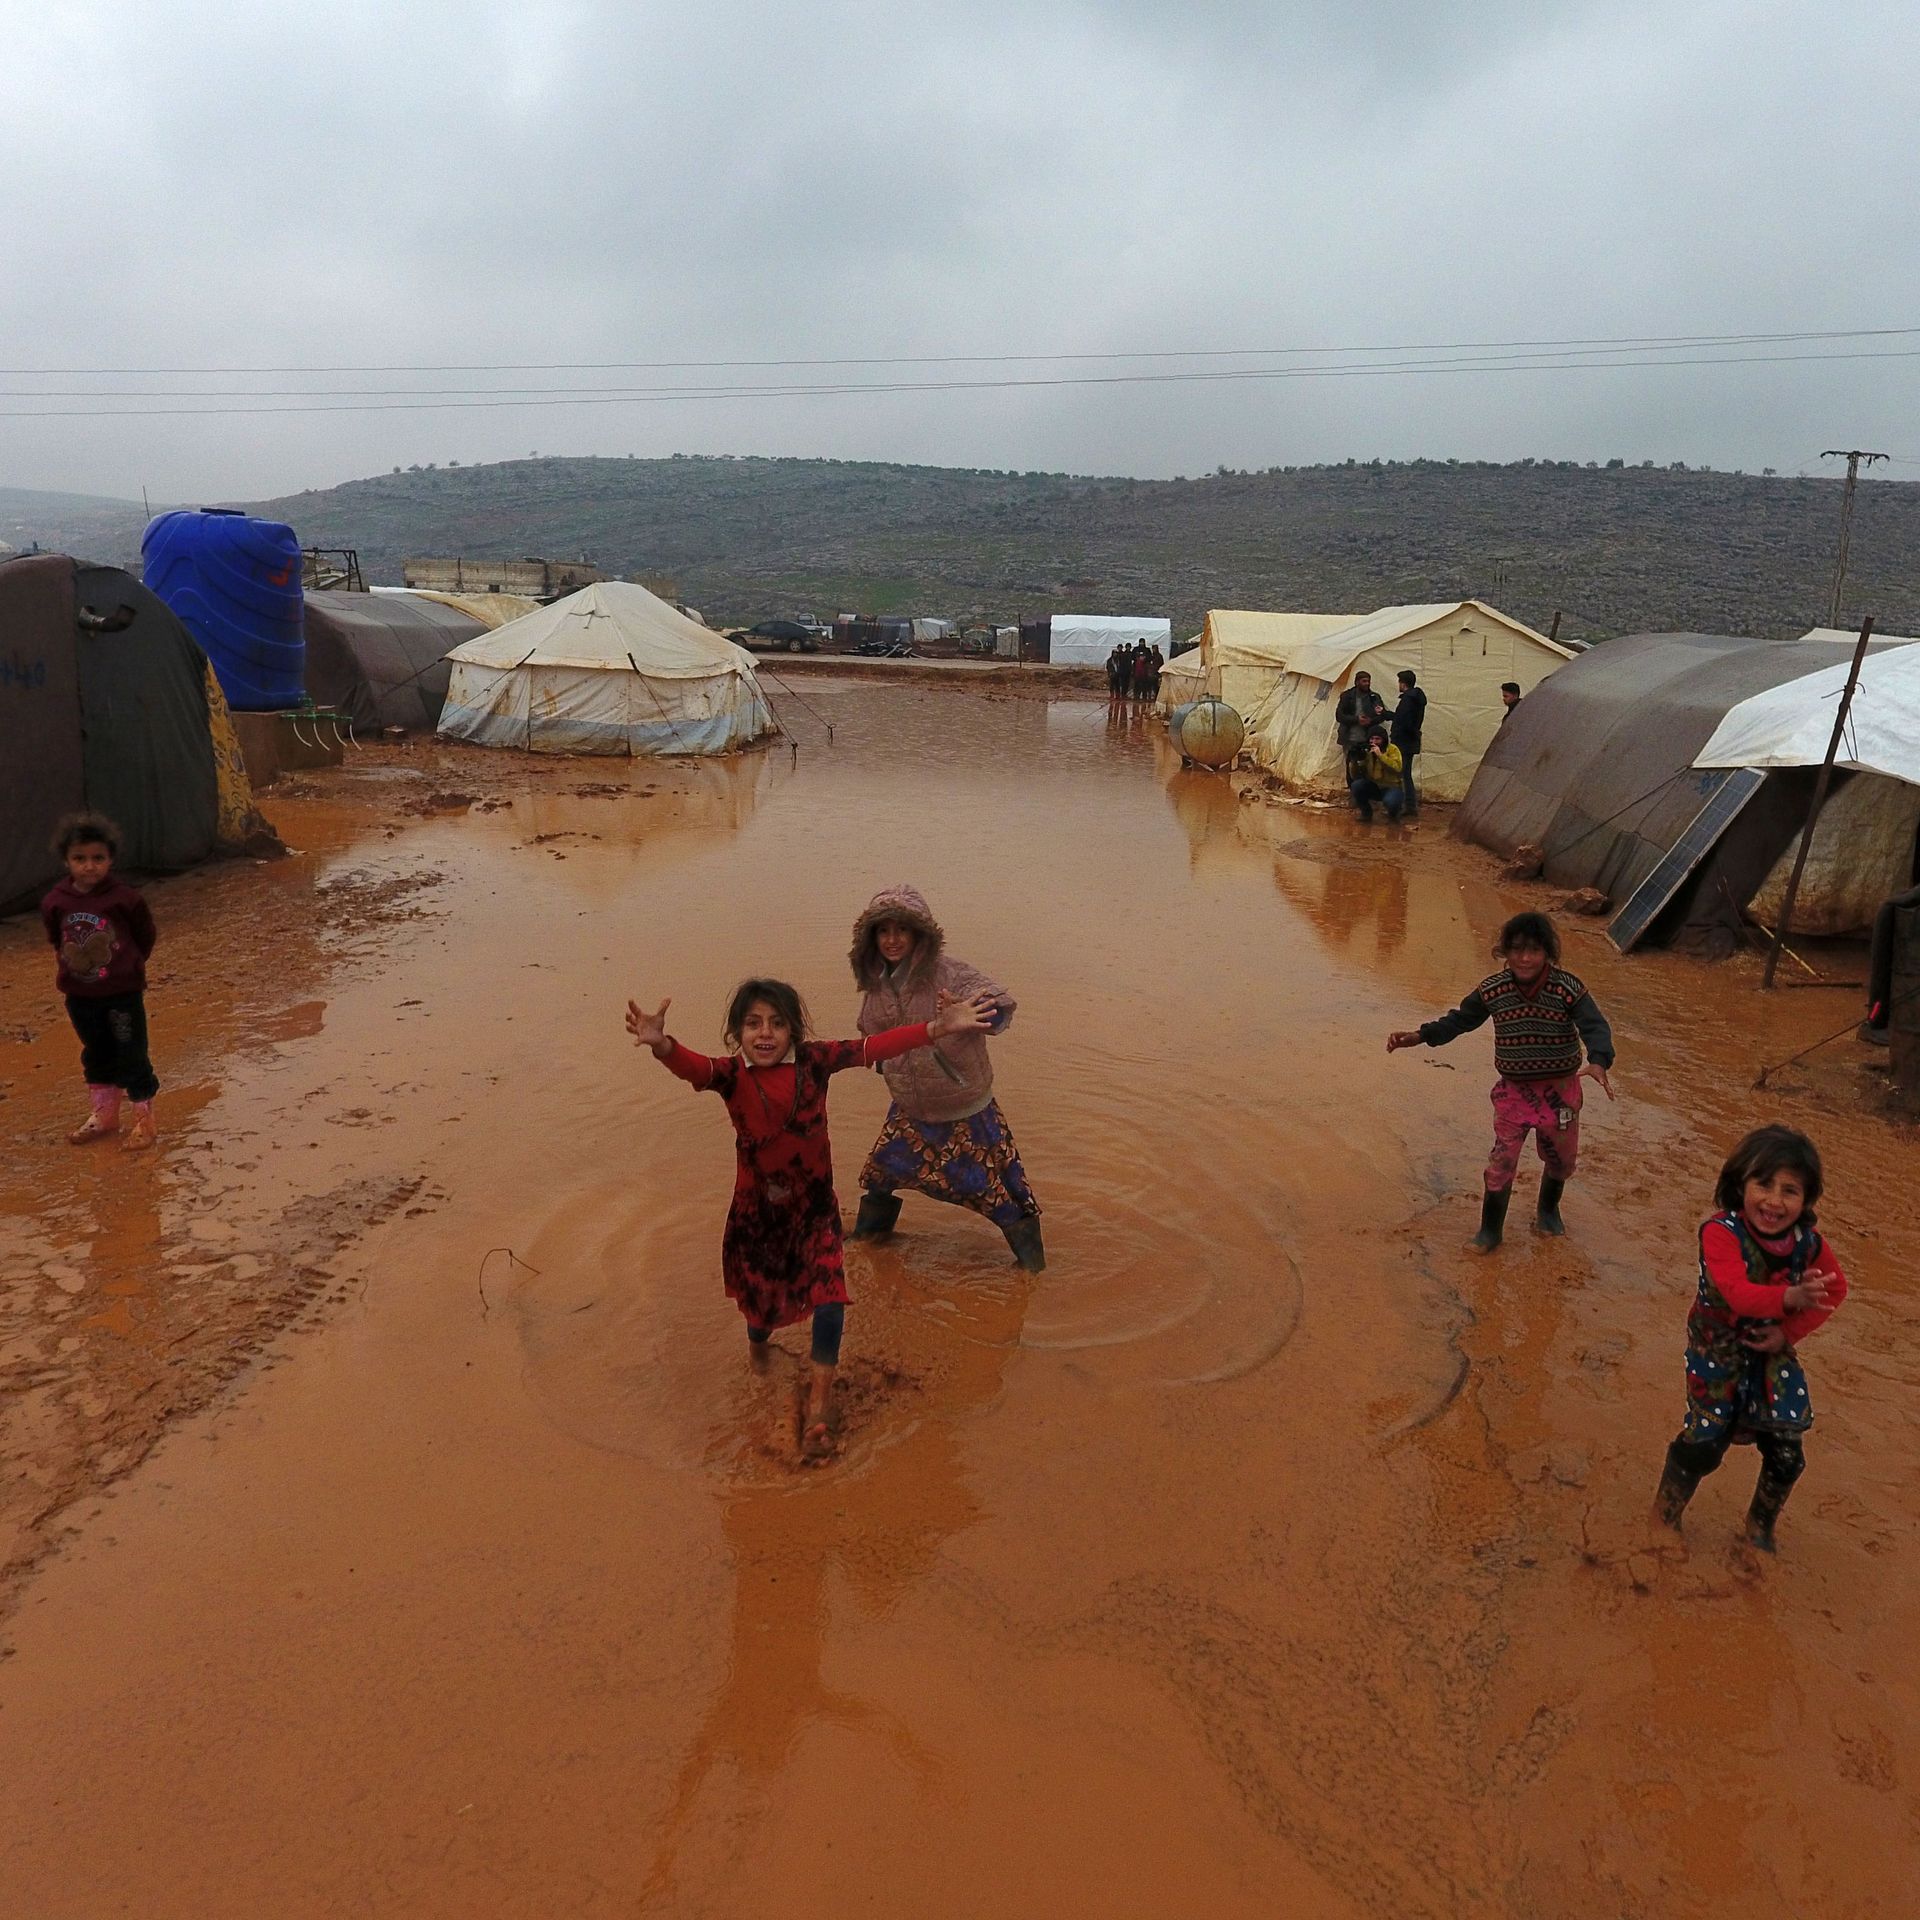 children playing in between tents on wet ground of refugee camp